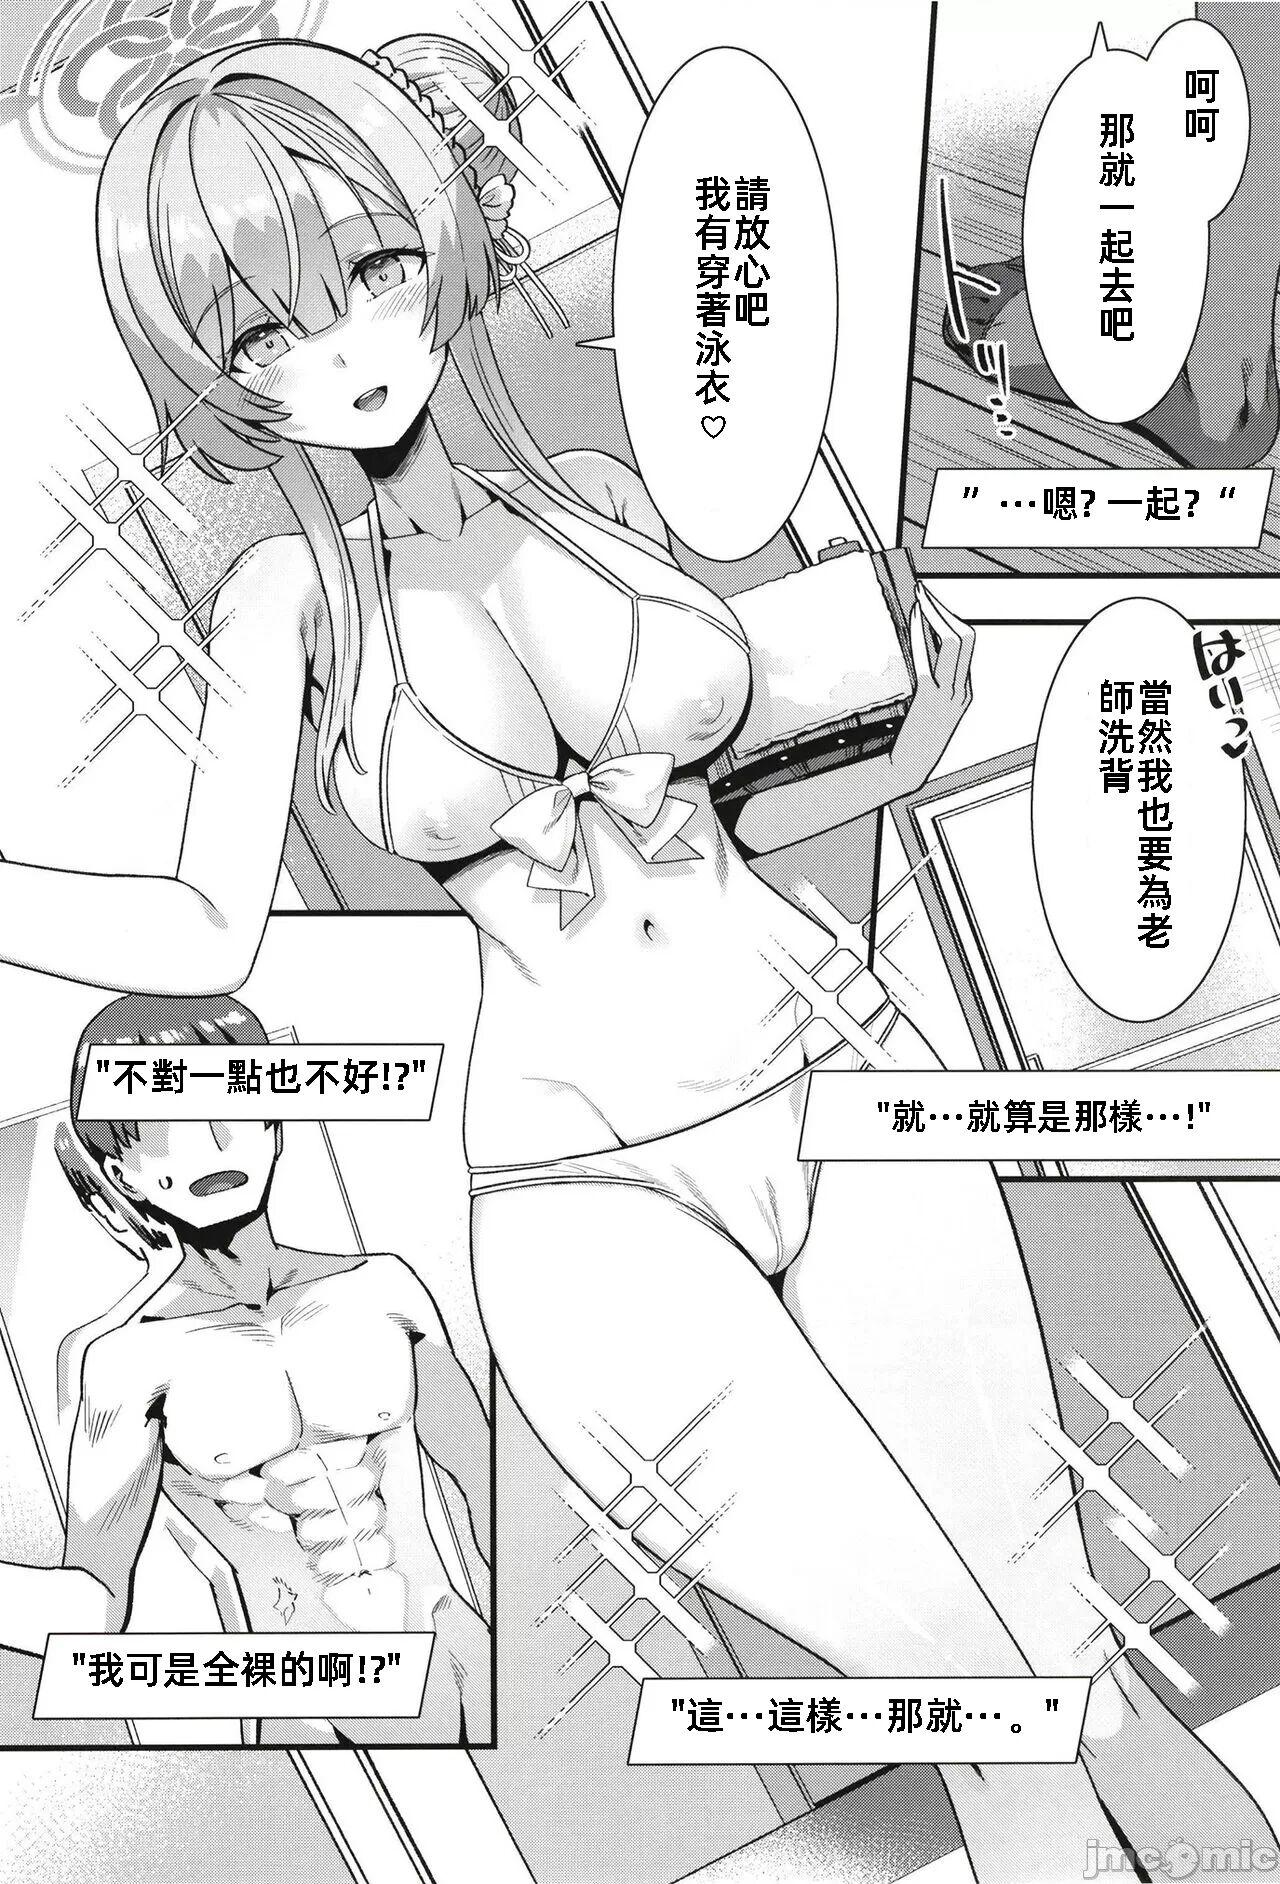 Ass To Mouth オキシトシンオーバードーズ - Blue archive Best Blowjob - Page 5